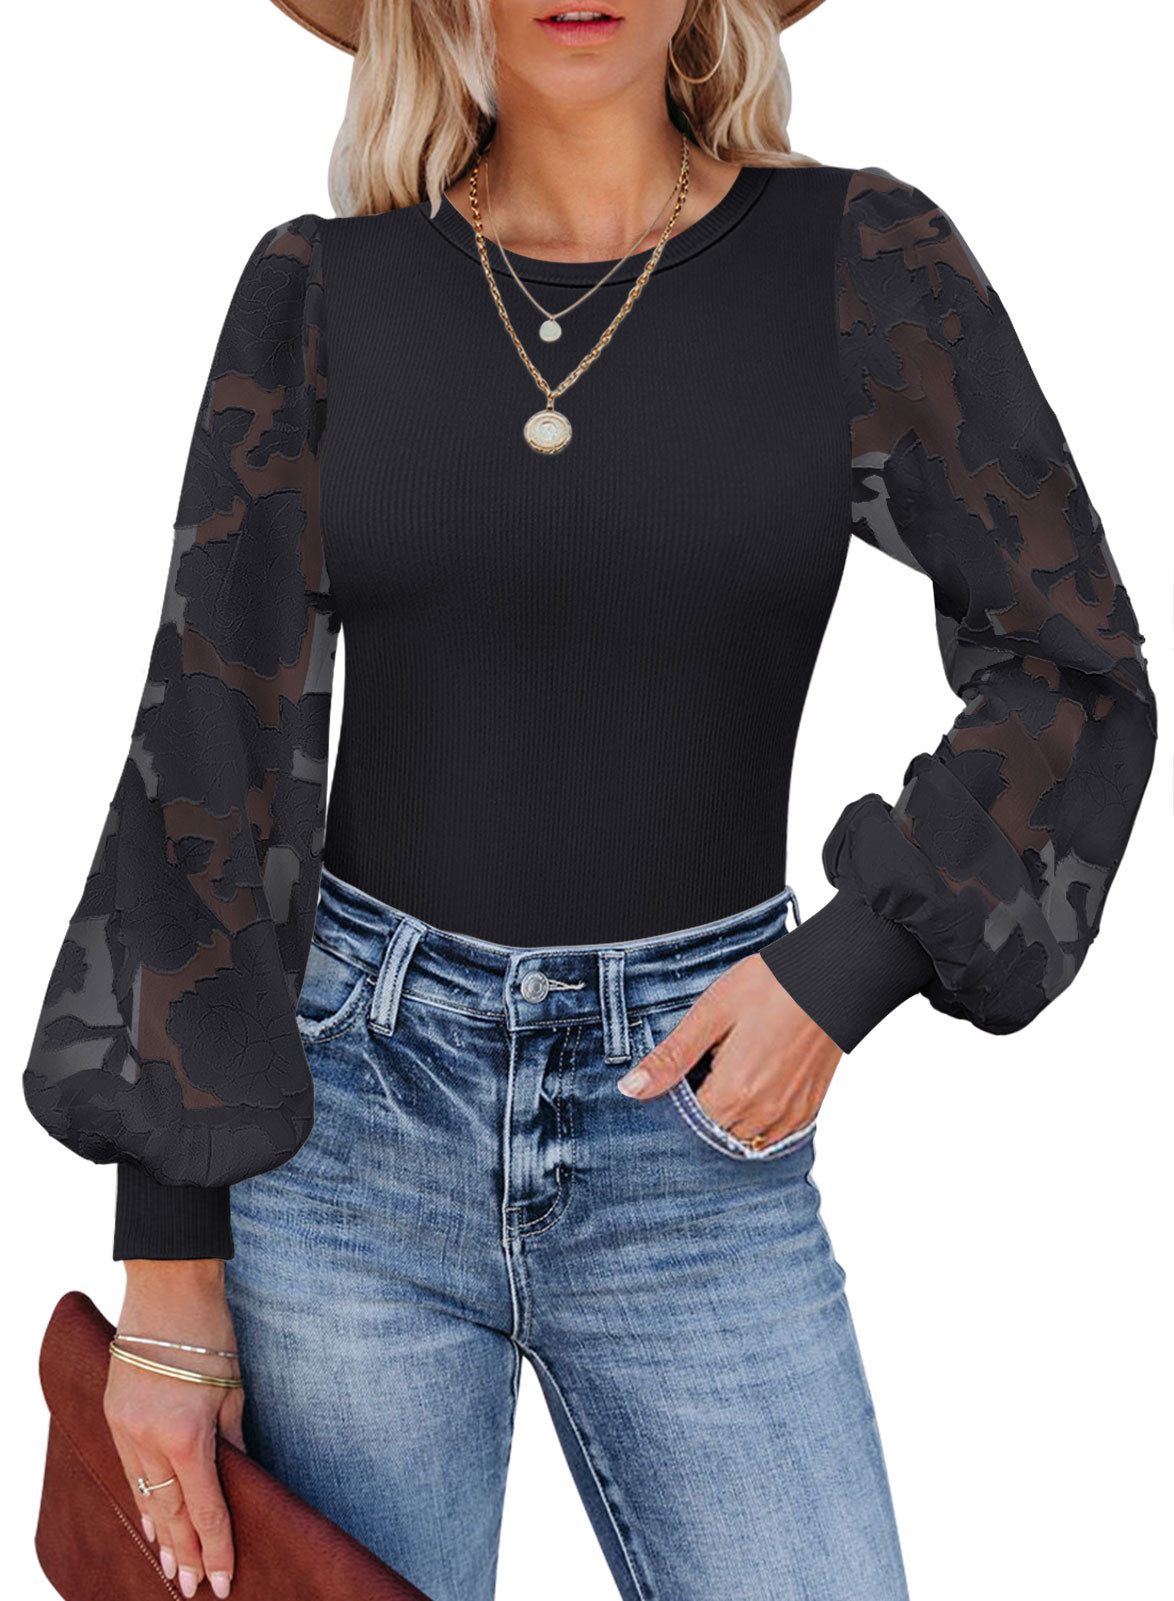 MIHOLL Women's Long Sleeve Shirt Round Neck Winter Casual Blouses Tops